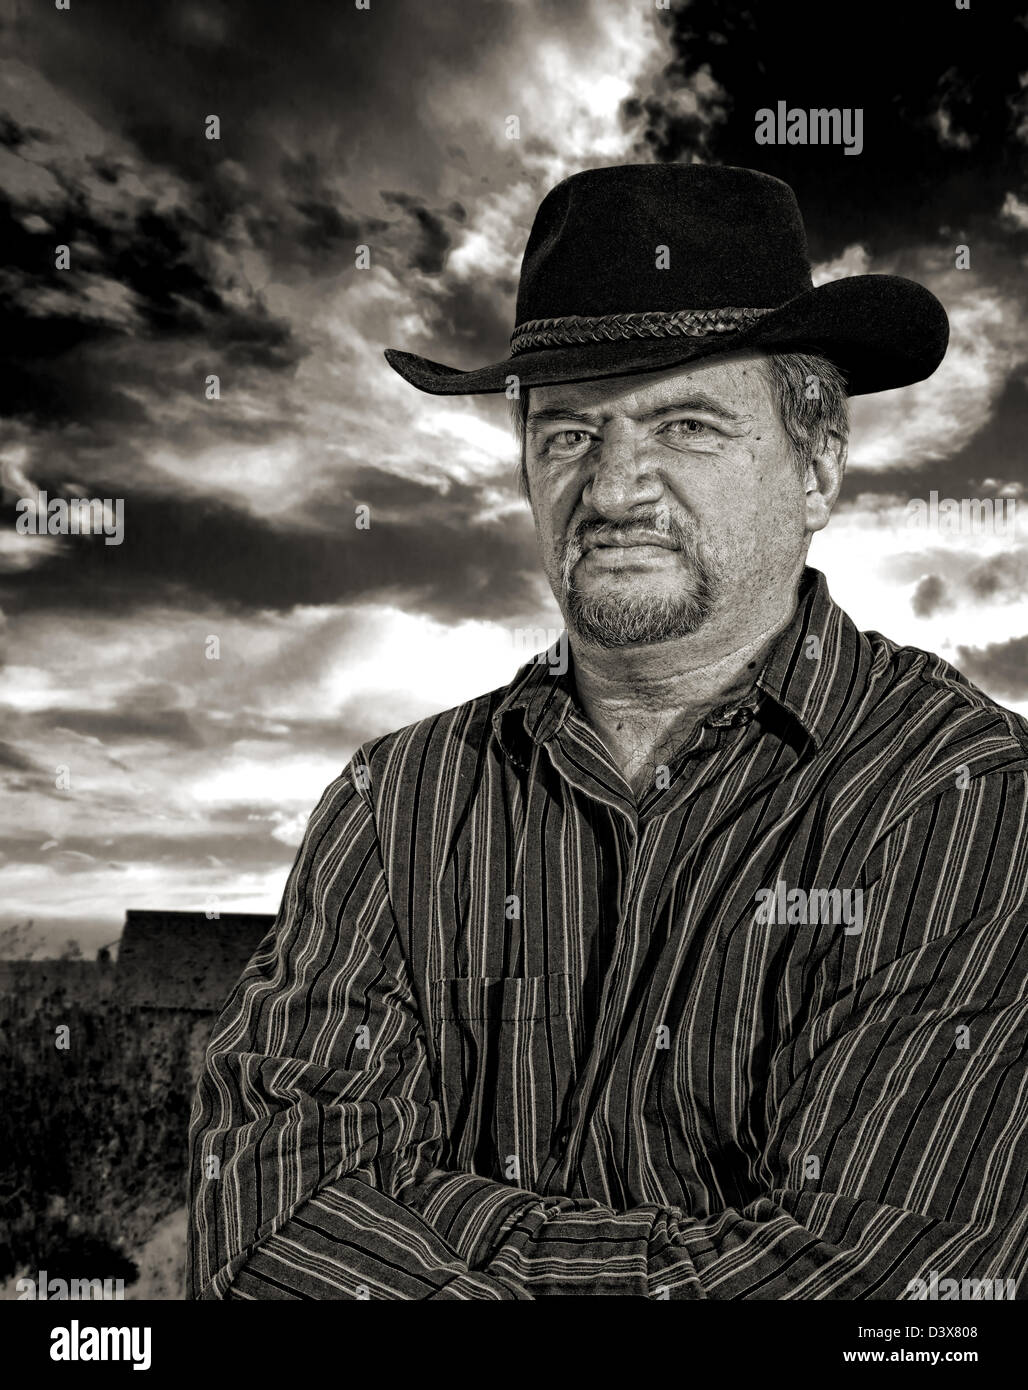 Rancher scowling with an old building with stormy sky in the background in monochrome with sepia toning Stock Photo